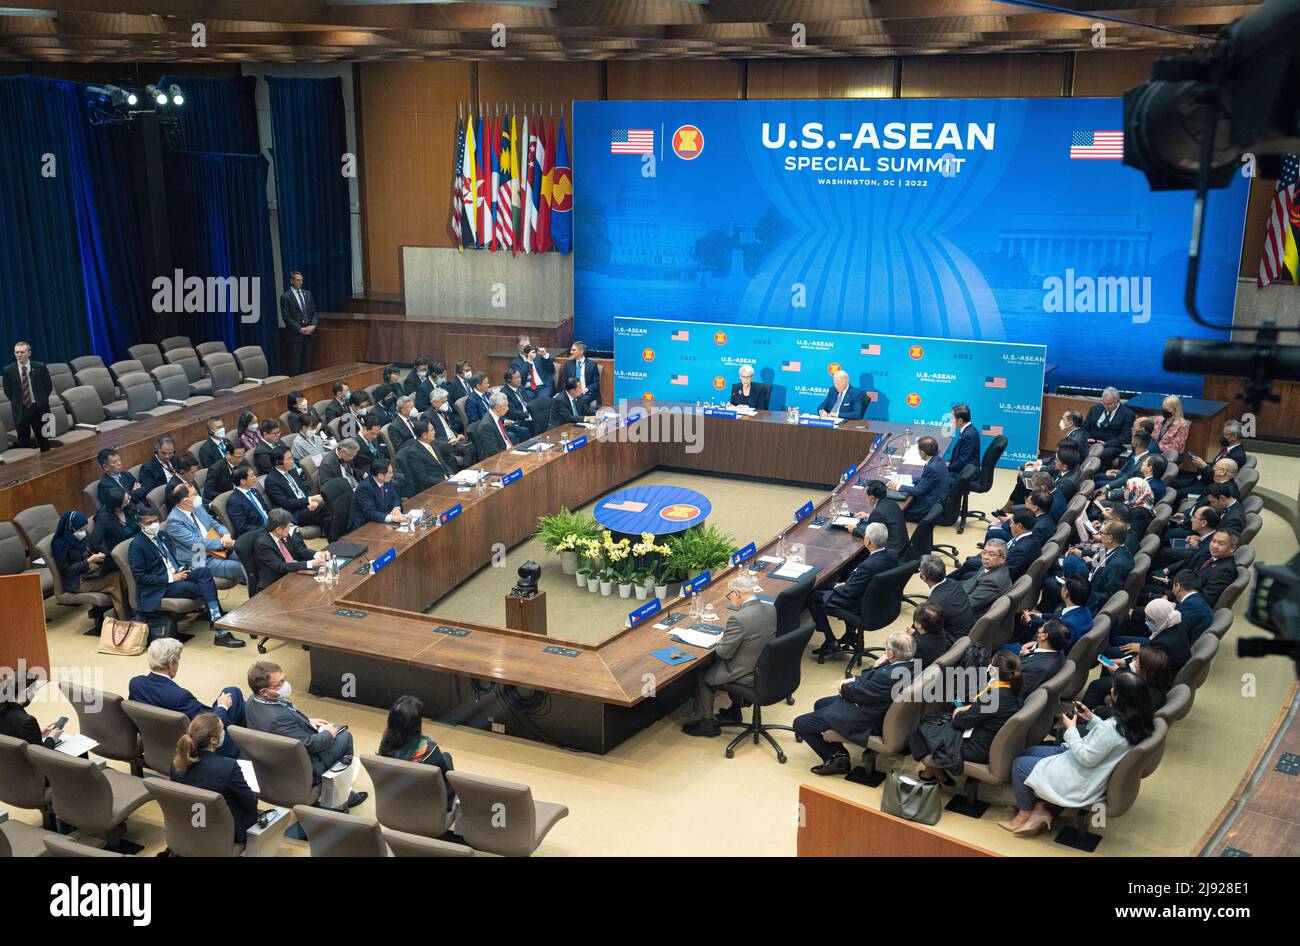 Washington, United States of America. 13 May, 2022. U.S President Joe Biden, takes part in the opening session of the U.S. - ASEAN Special Summit at the Department of State, May 13, 2022 in Washington, D.C.  Credit: Freddie Everett/U.S. State Department/Alamy Live News Stock Photo